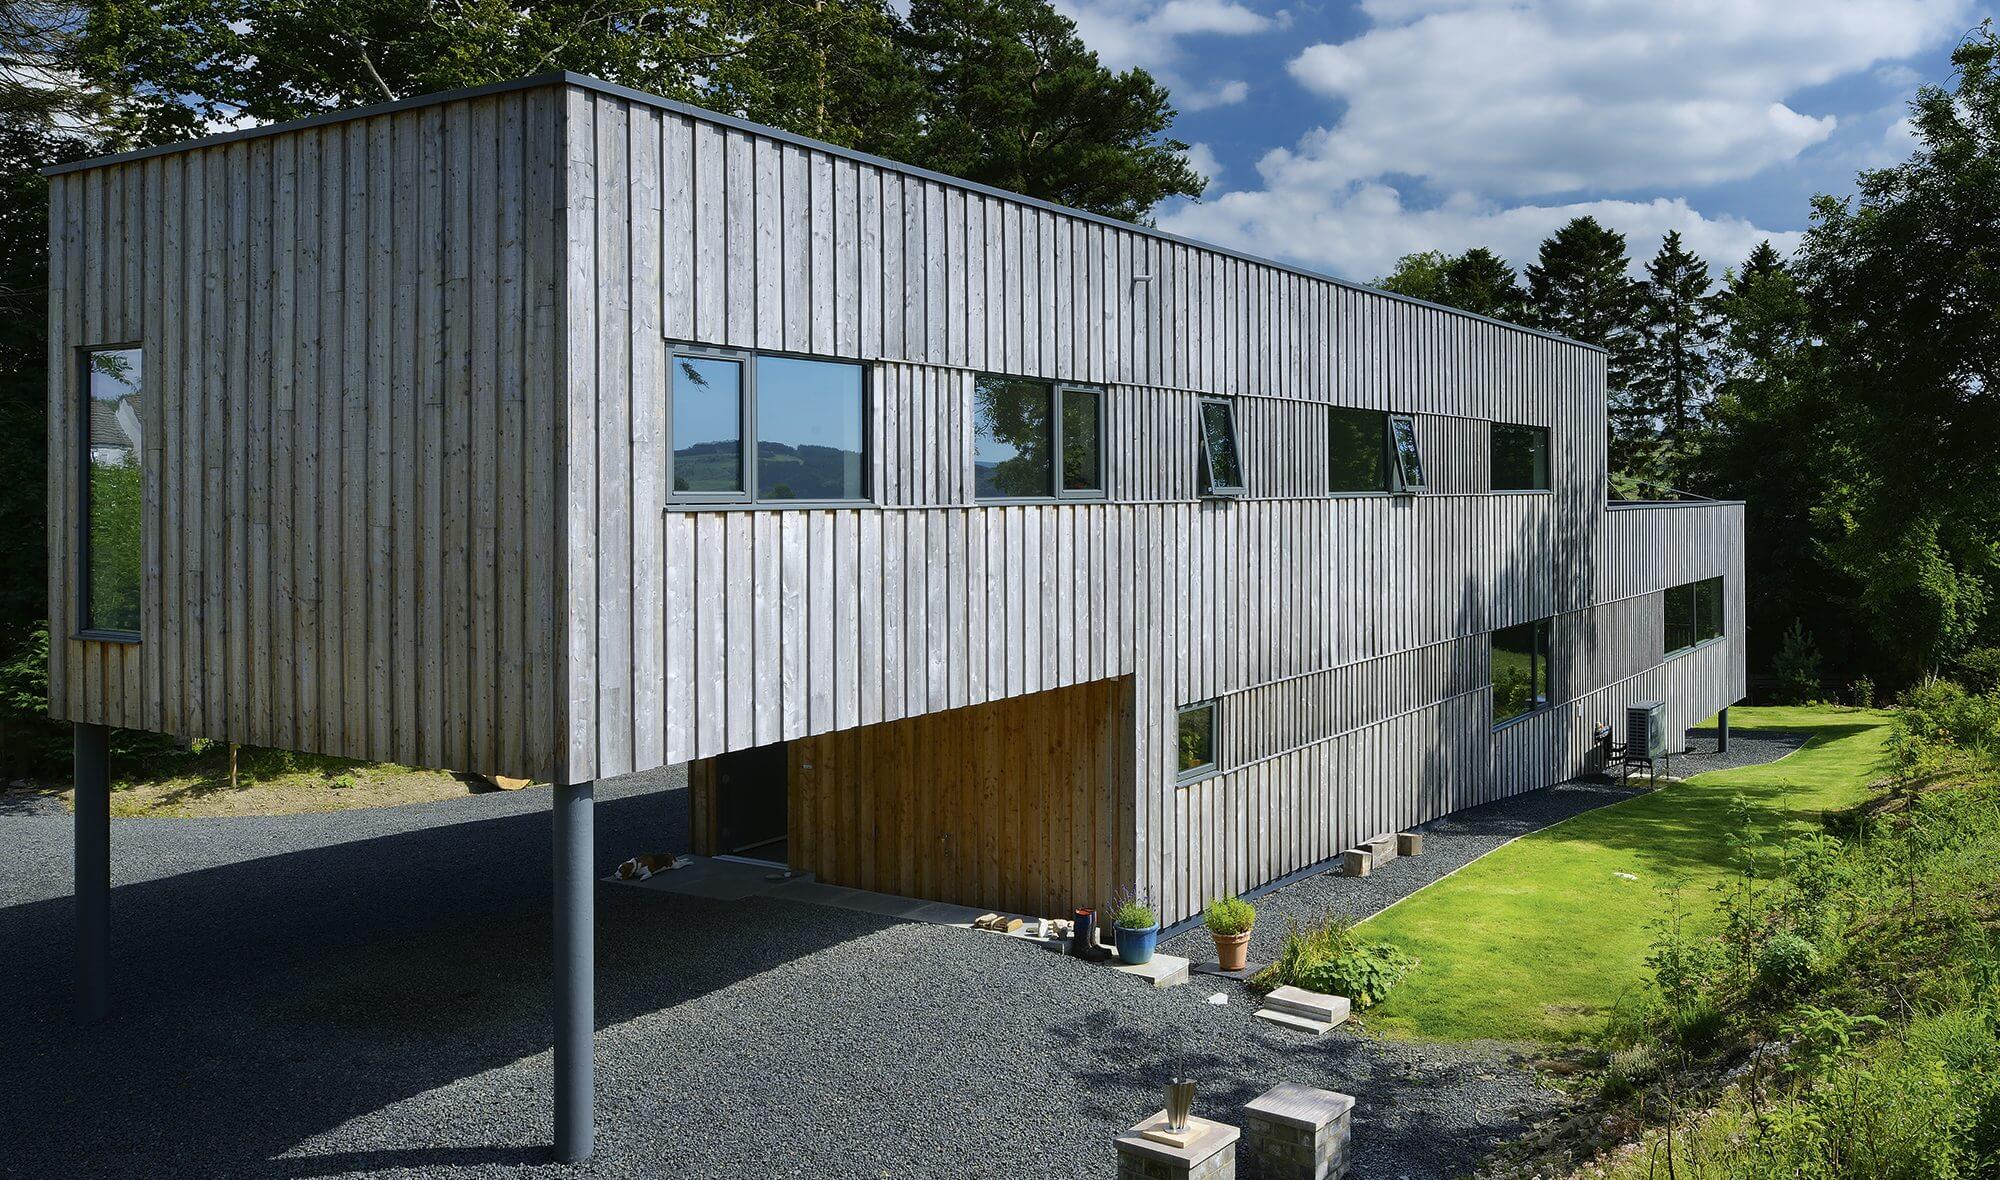 Scotlarch timber cladding by Russwood